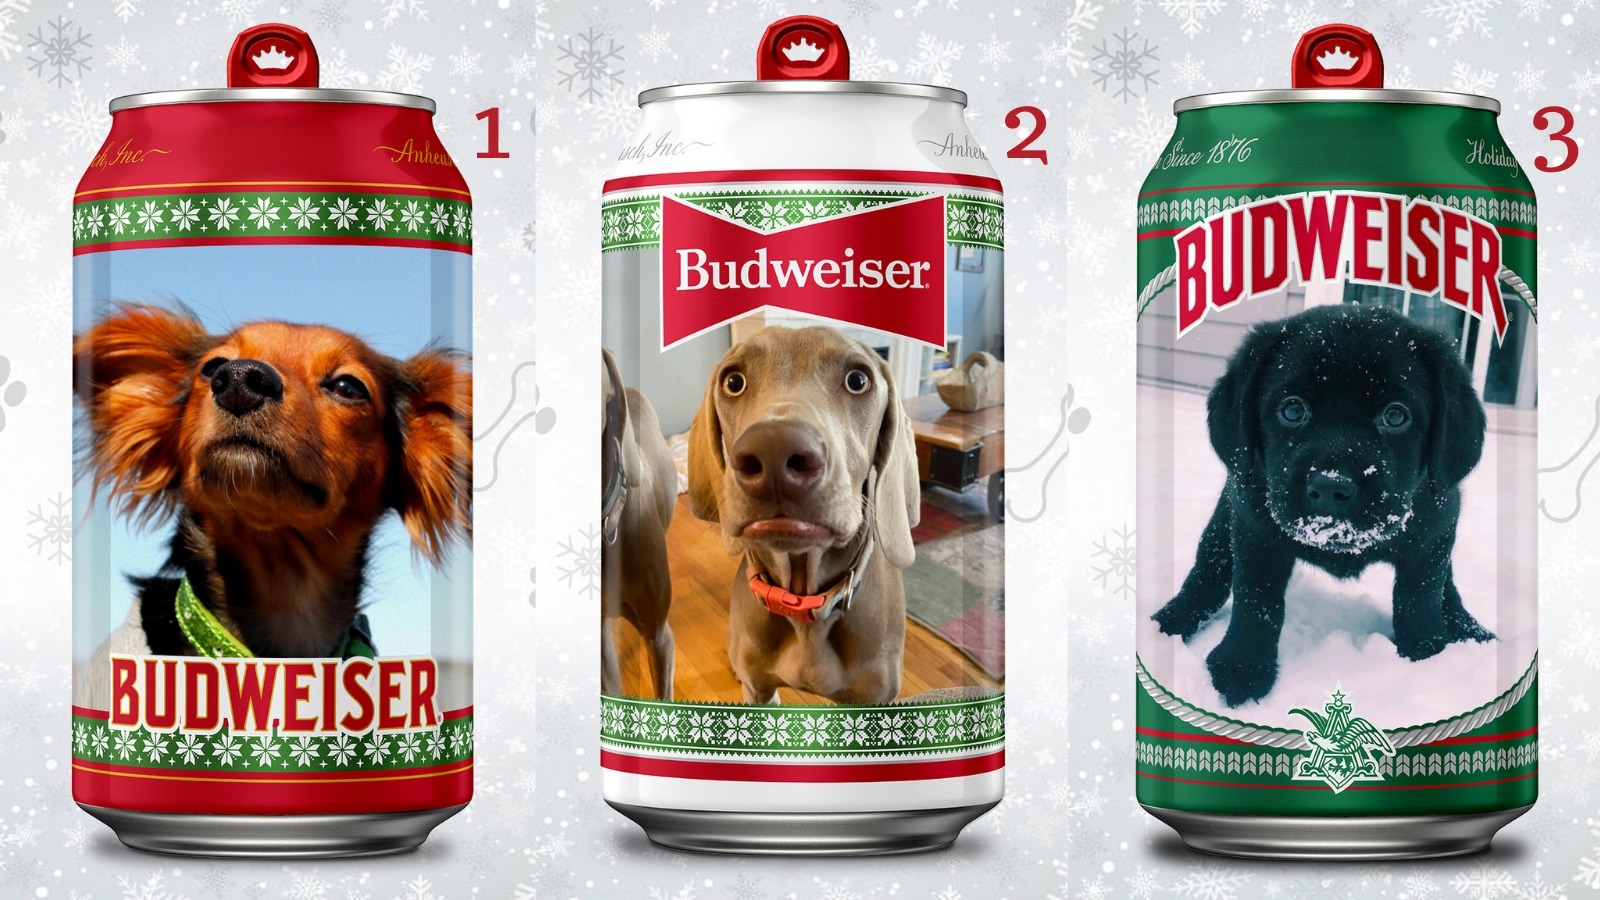 Budweiser could put a picture of your dog on its beer can